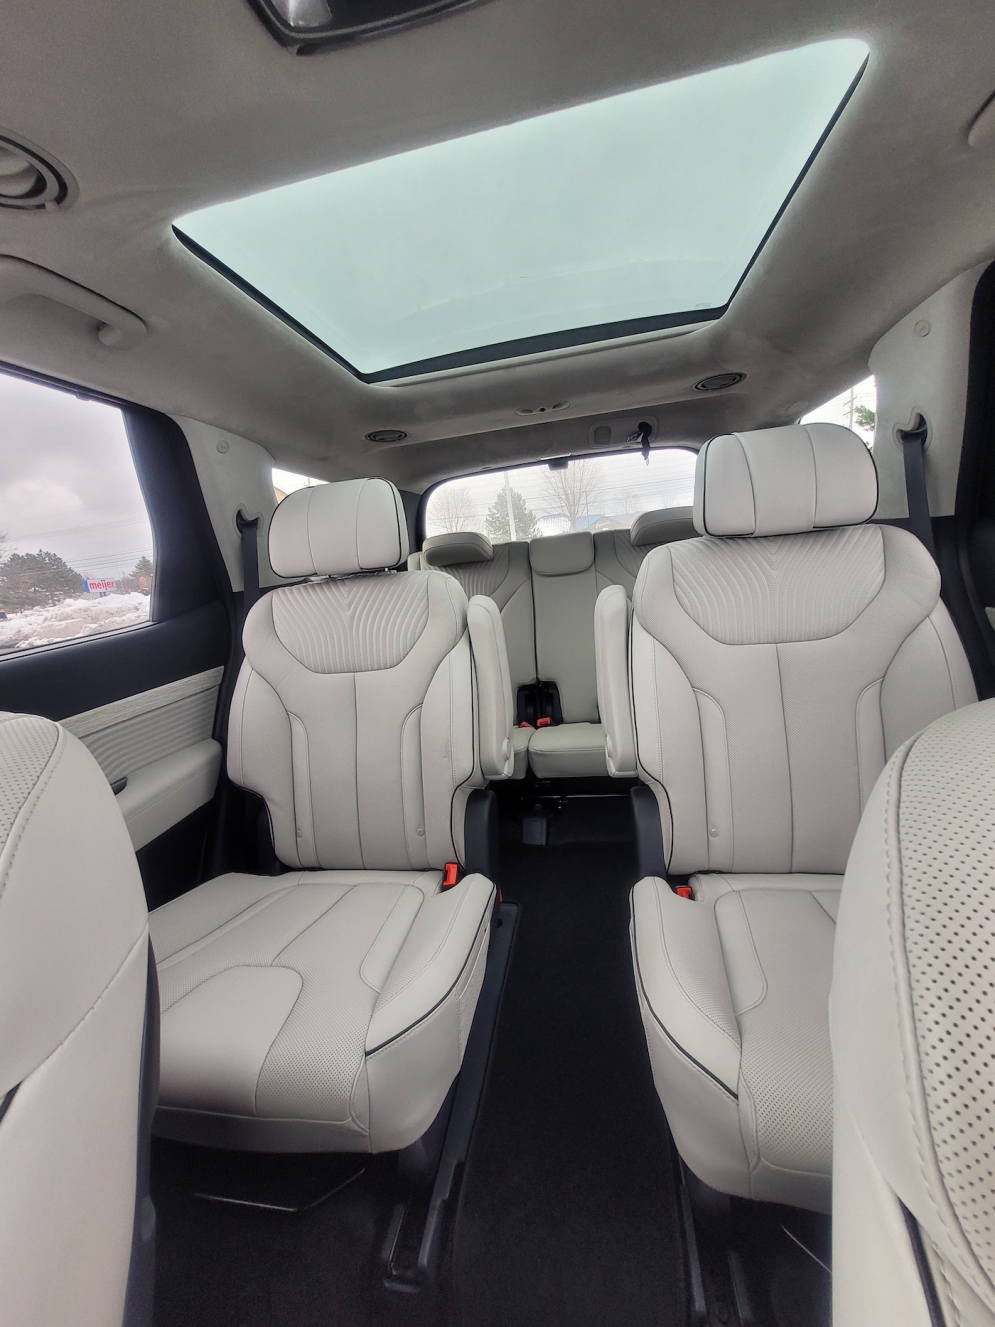 The interior of the 2023 Hyundai Palisade is spacious for both passengers and cargo.